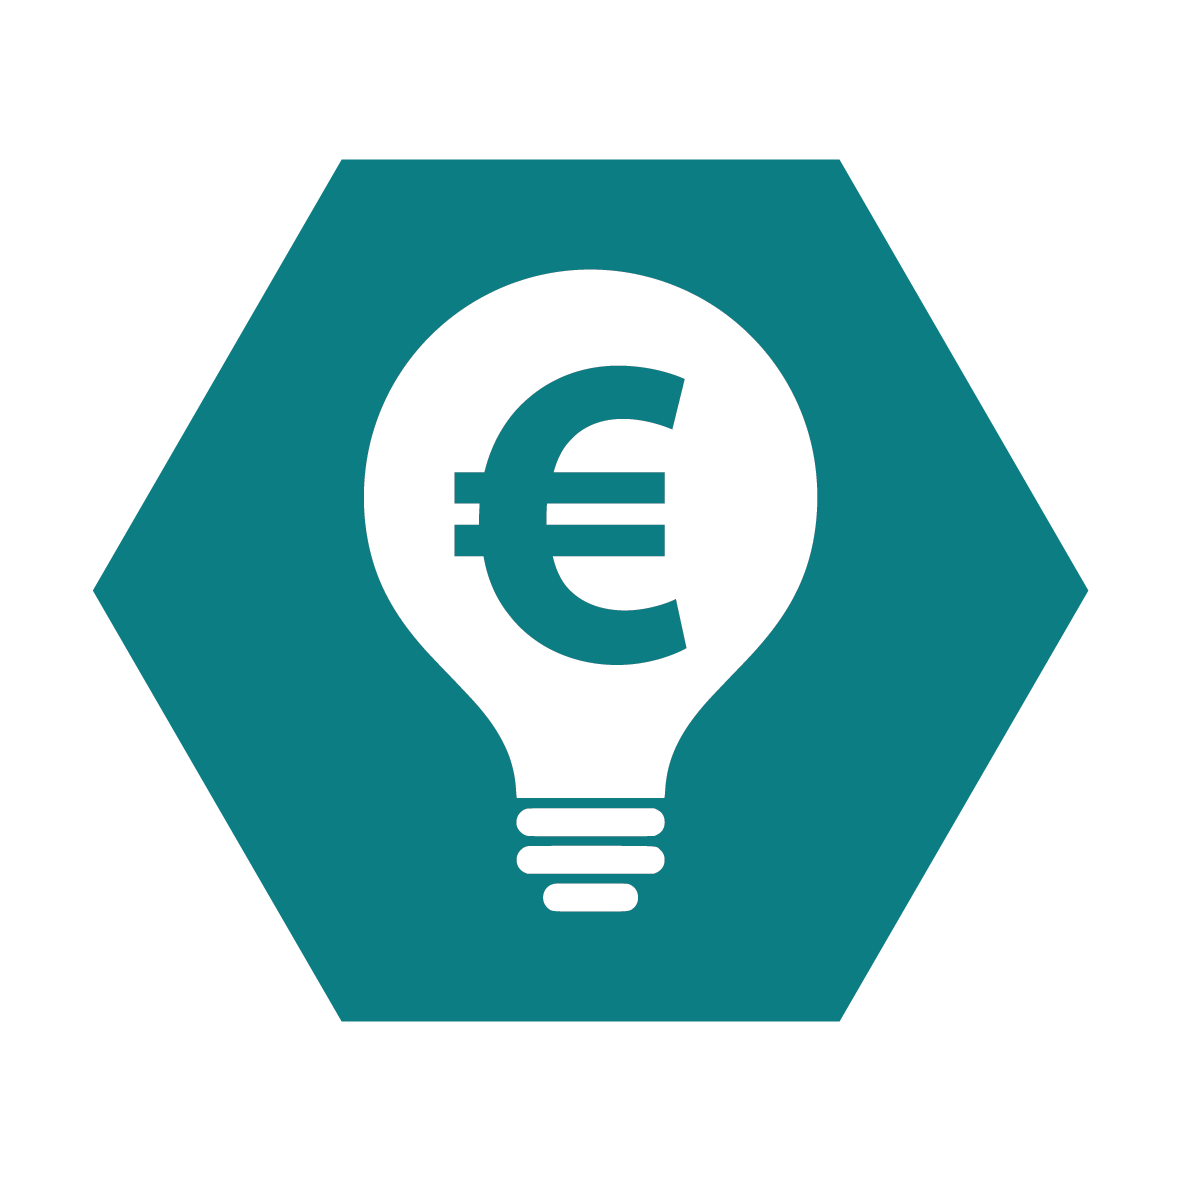 A light bulb icon that has euro sign in it to describe starting a business.